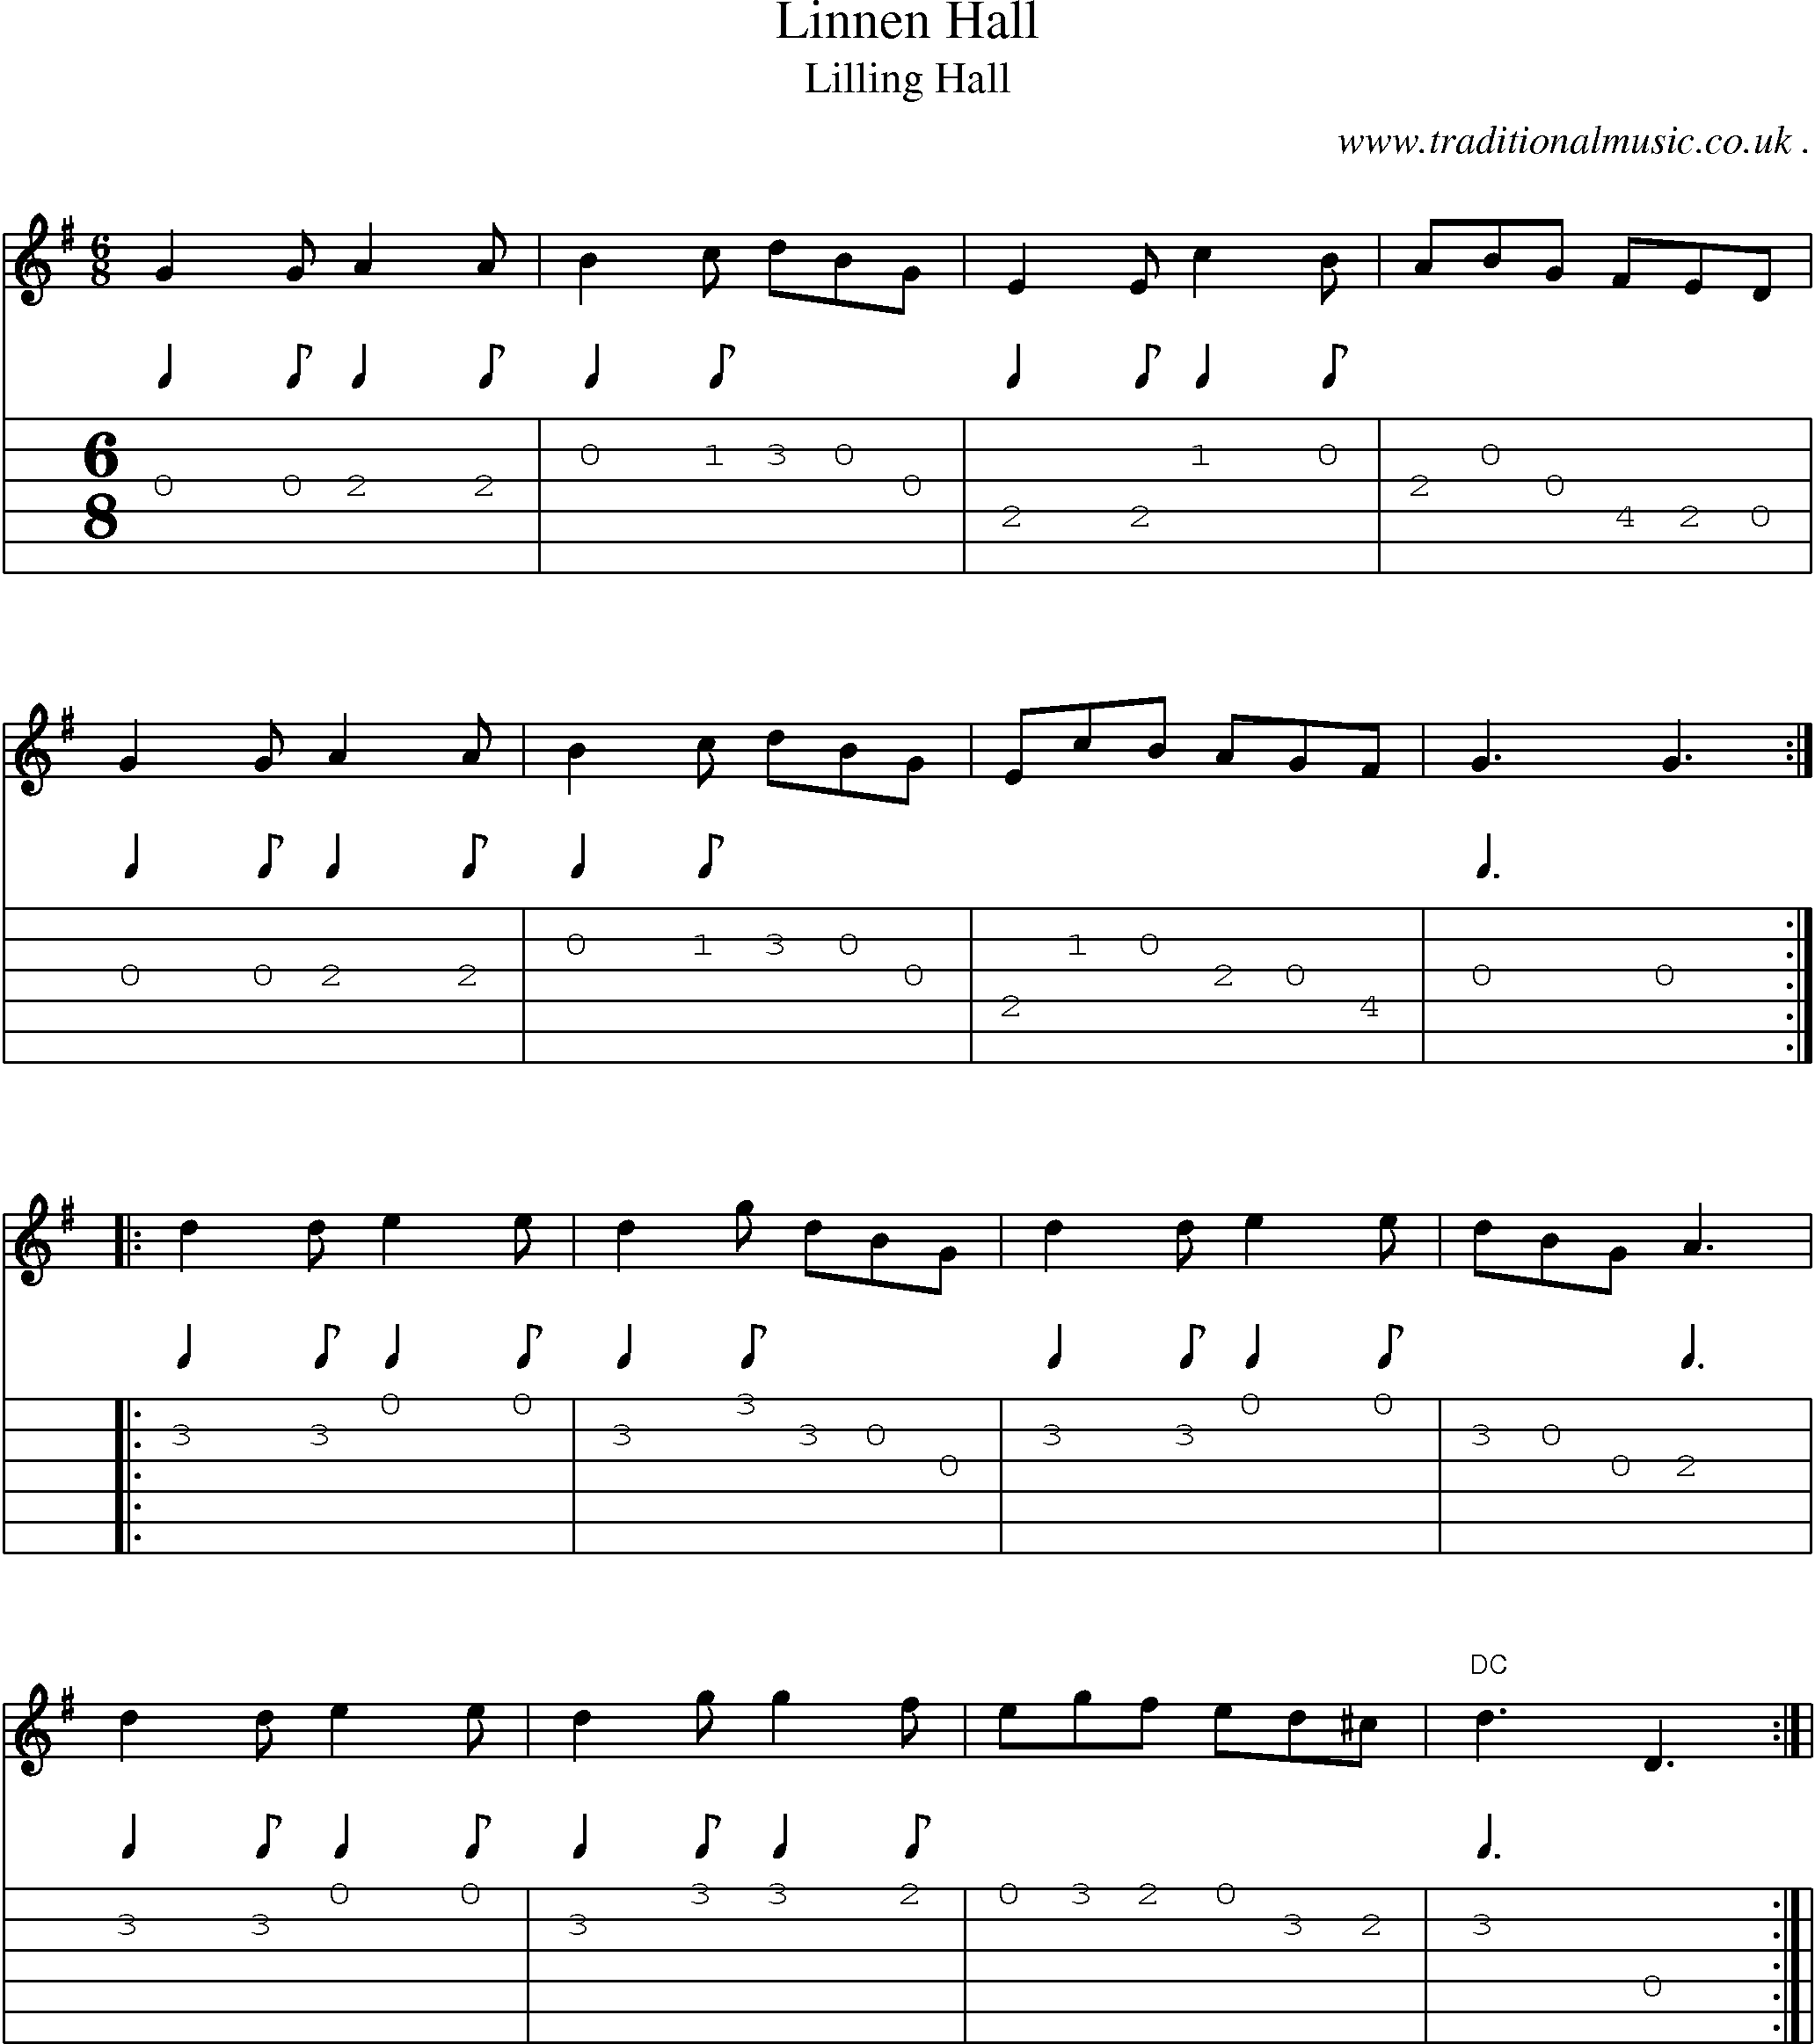 Sheet-Music and Guitar Tabs for Linnen Hall